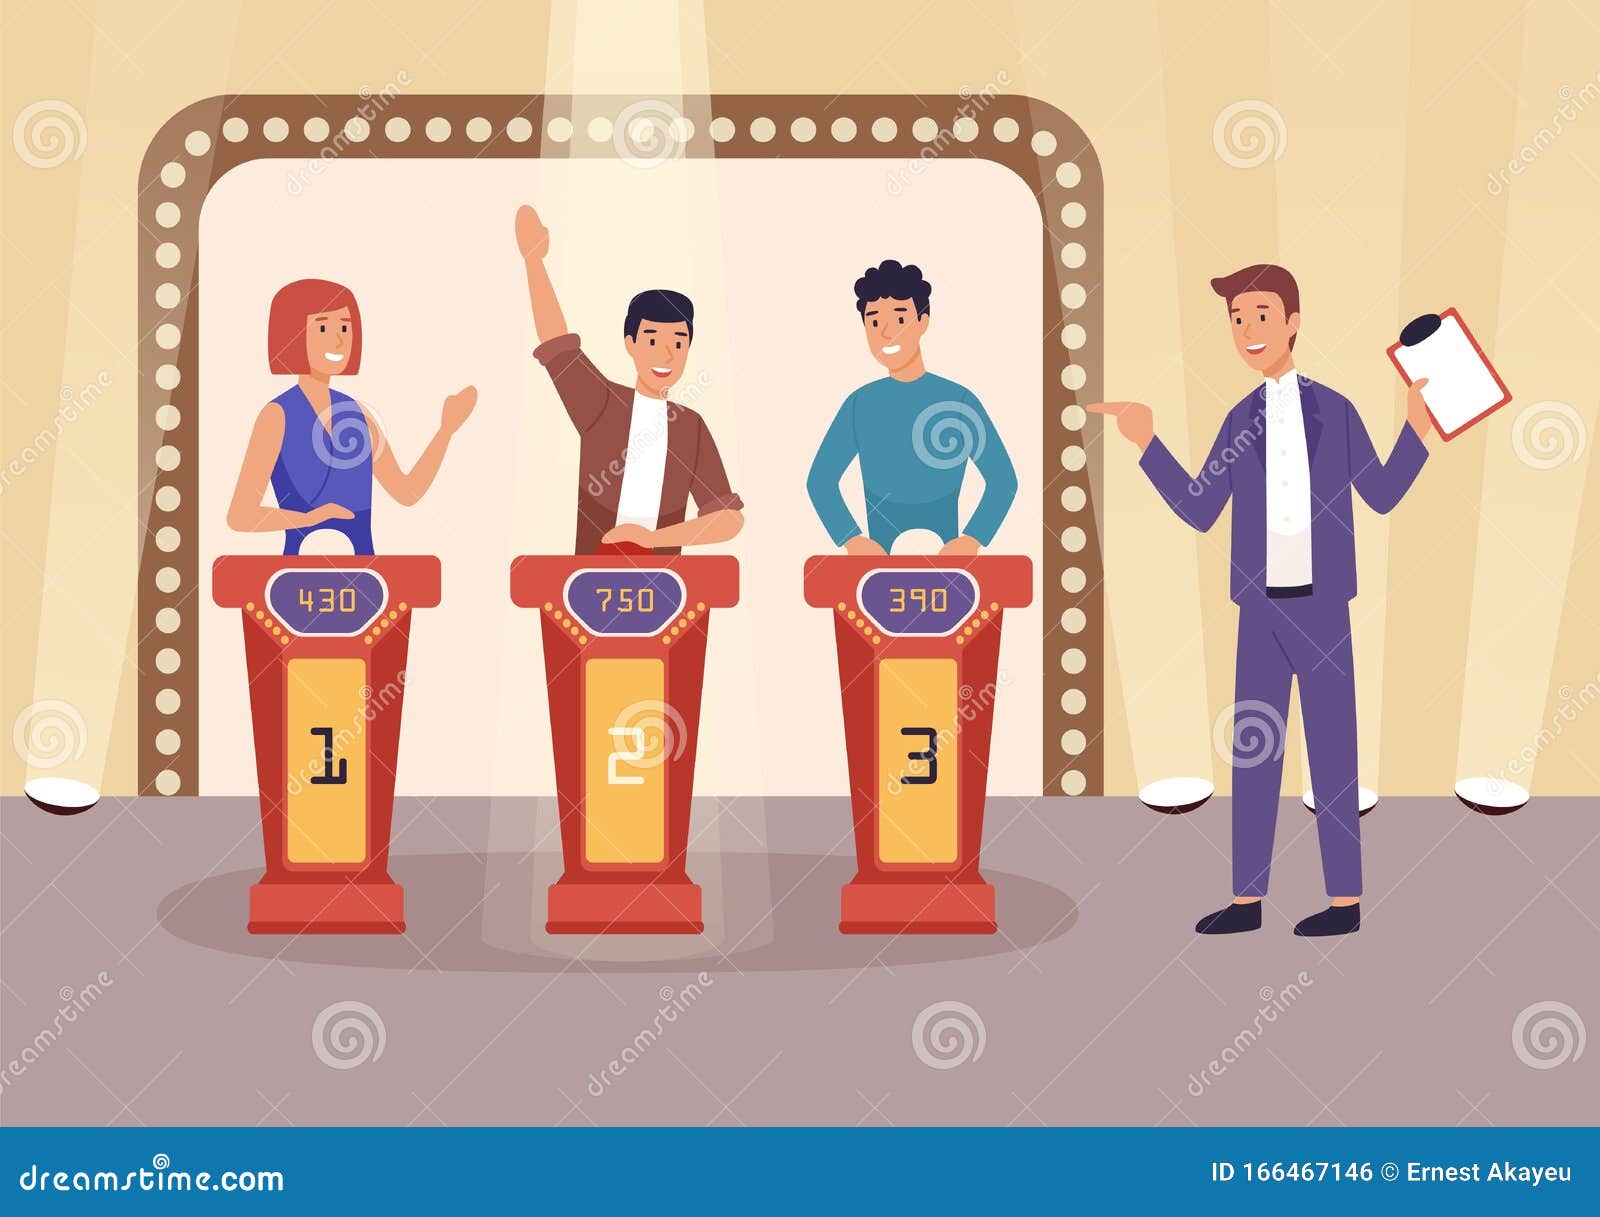 Quiz TV Show Flat Vector Illustration. People Cartoon Characters Playing  Television Game Show, Answering Questions and Stock Vector - Illustration  of competition, people: 166467146